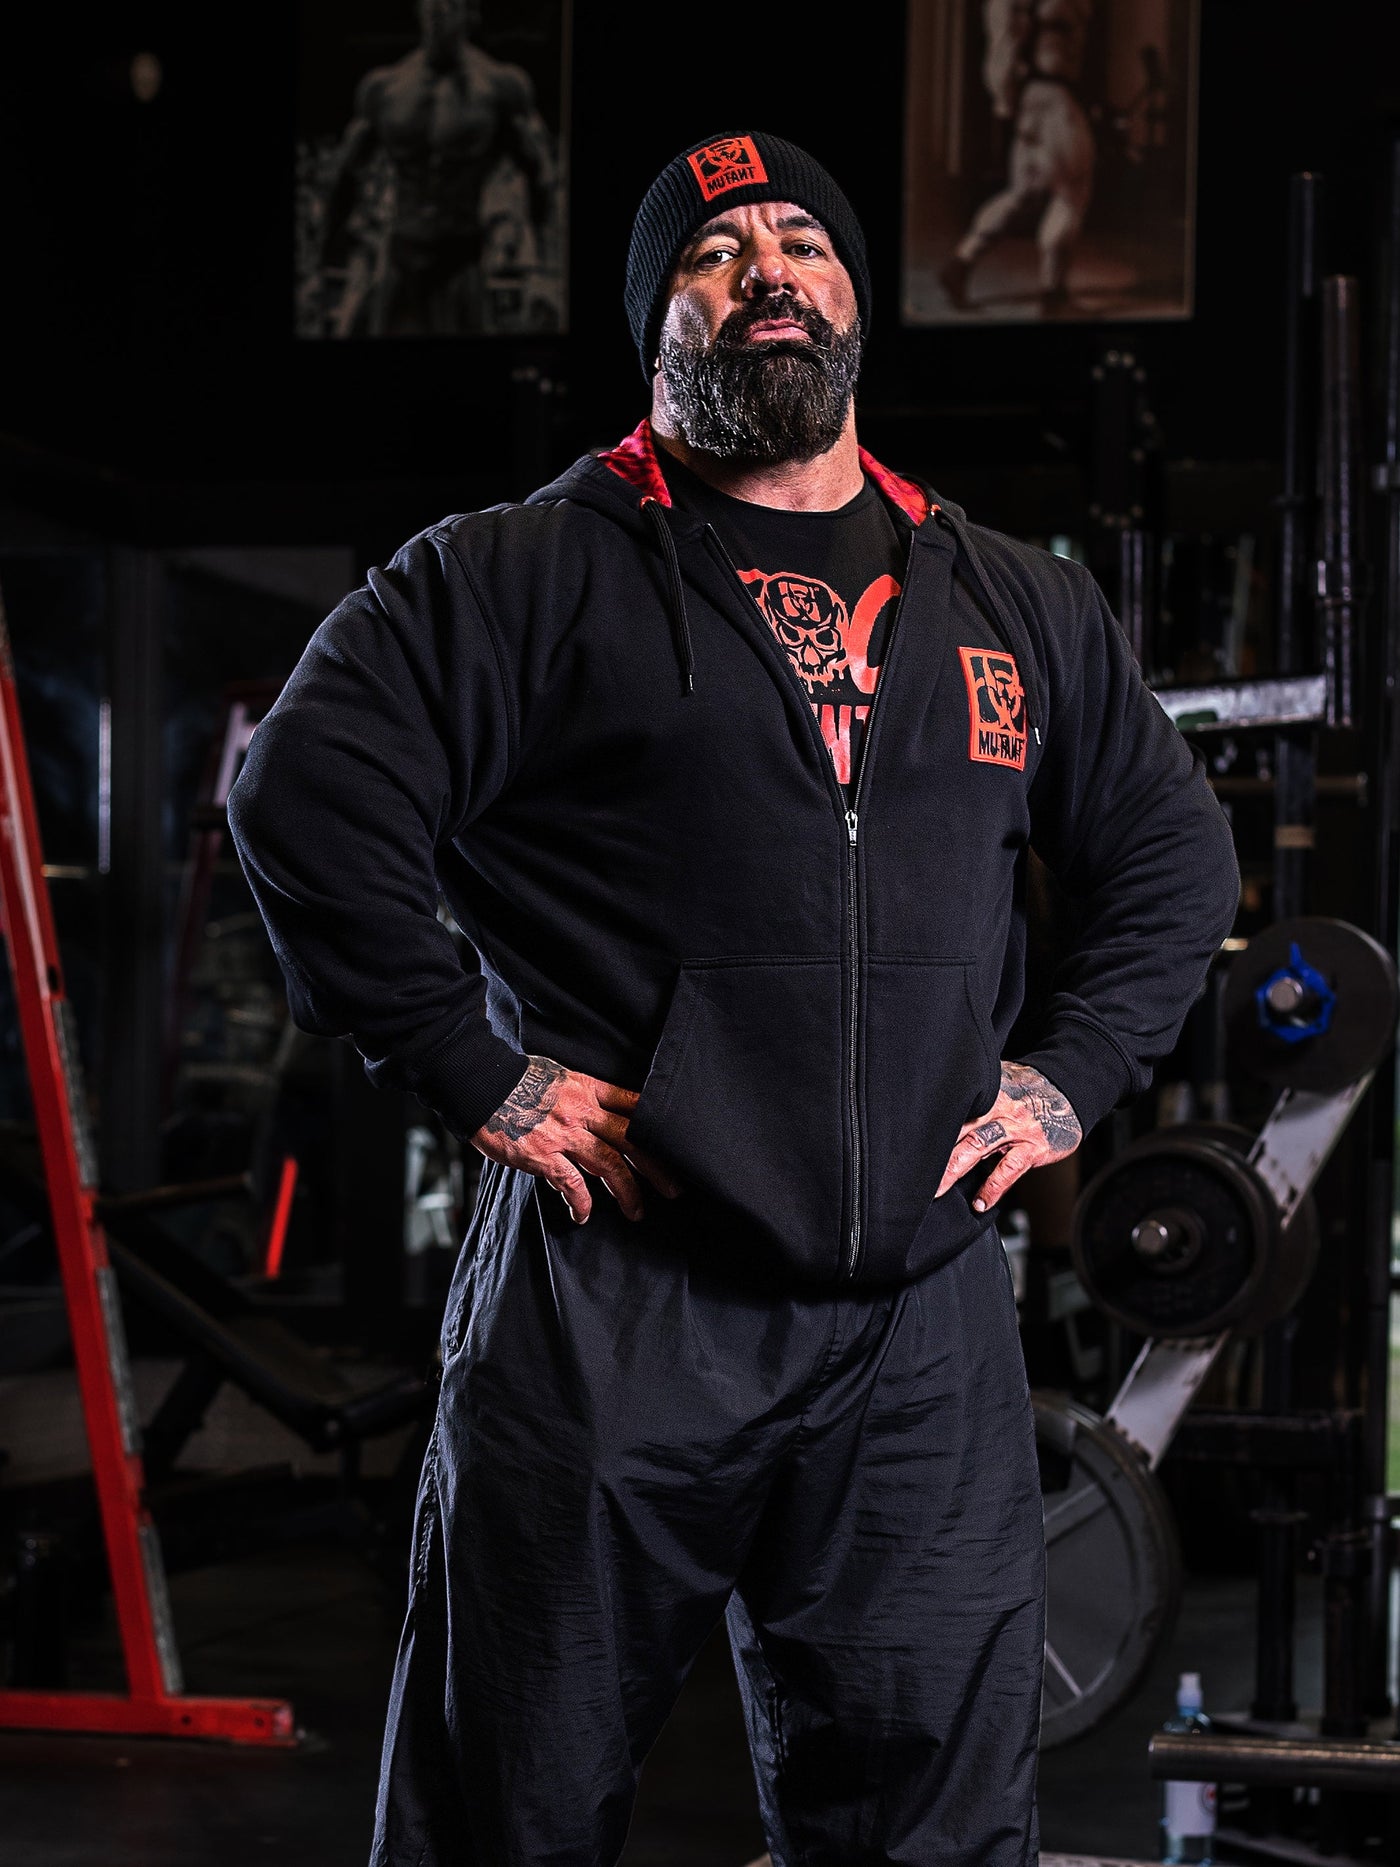 Mutant athlete Dusty Hanshaw posing in the gym wearing Black Mutant Patched Zip-Up Gym Hoodie with a red and black Mutant logo patch on left chest. Two pockets and red hood lining with red watermarked Mutant logo.